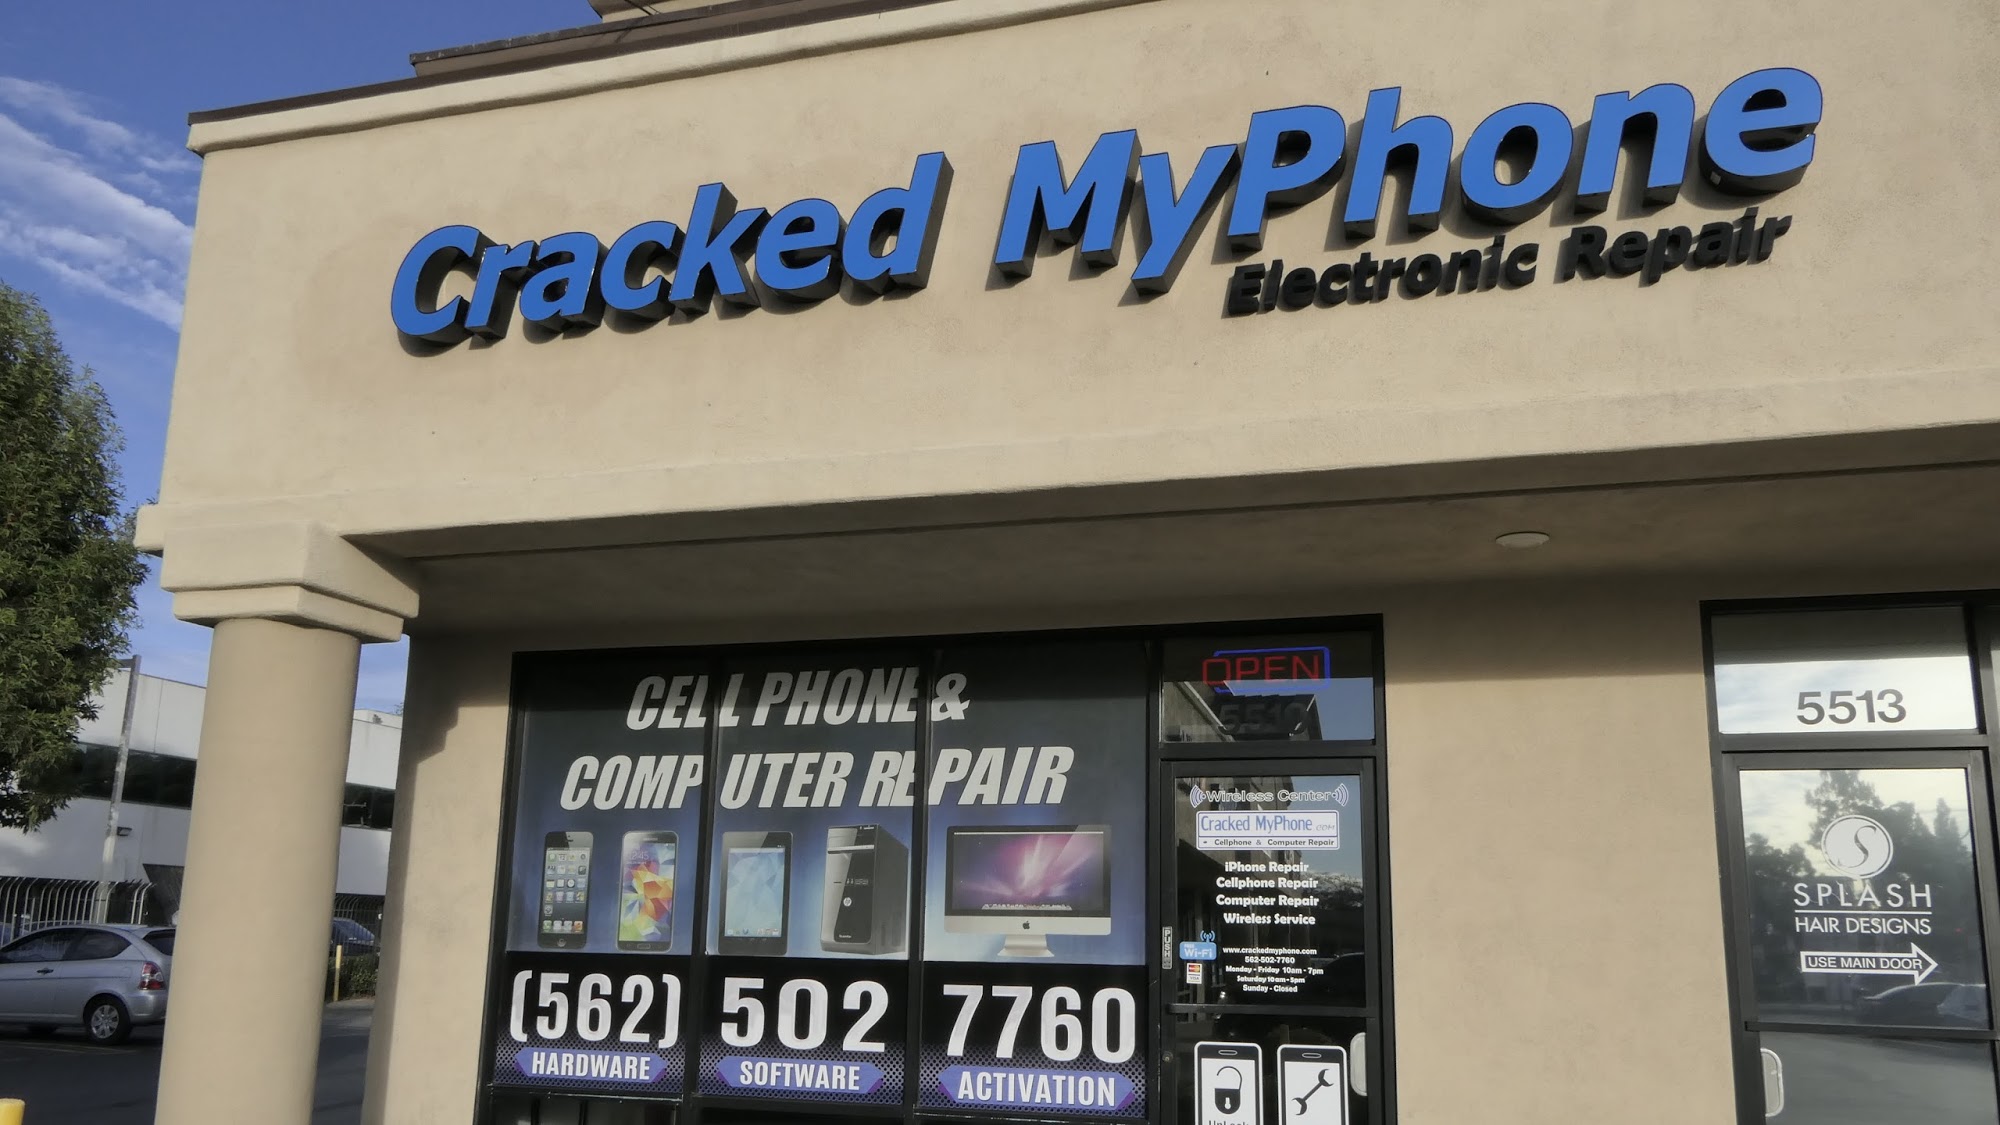 CrackedMyPhone Cell phone and Computer Repair